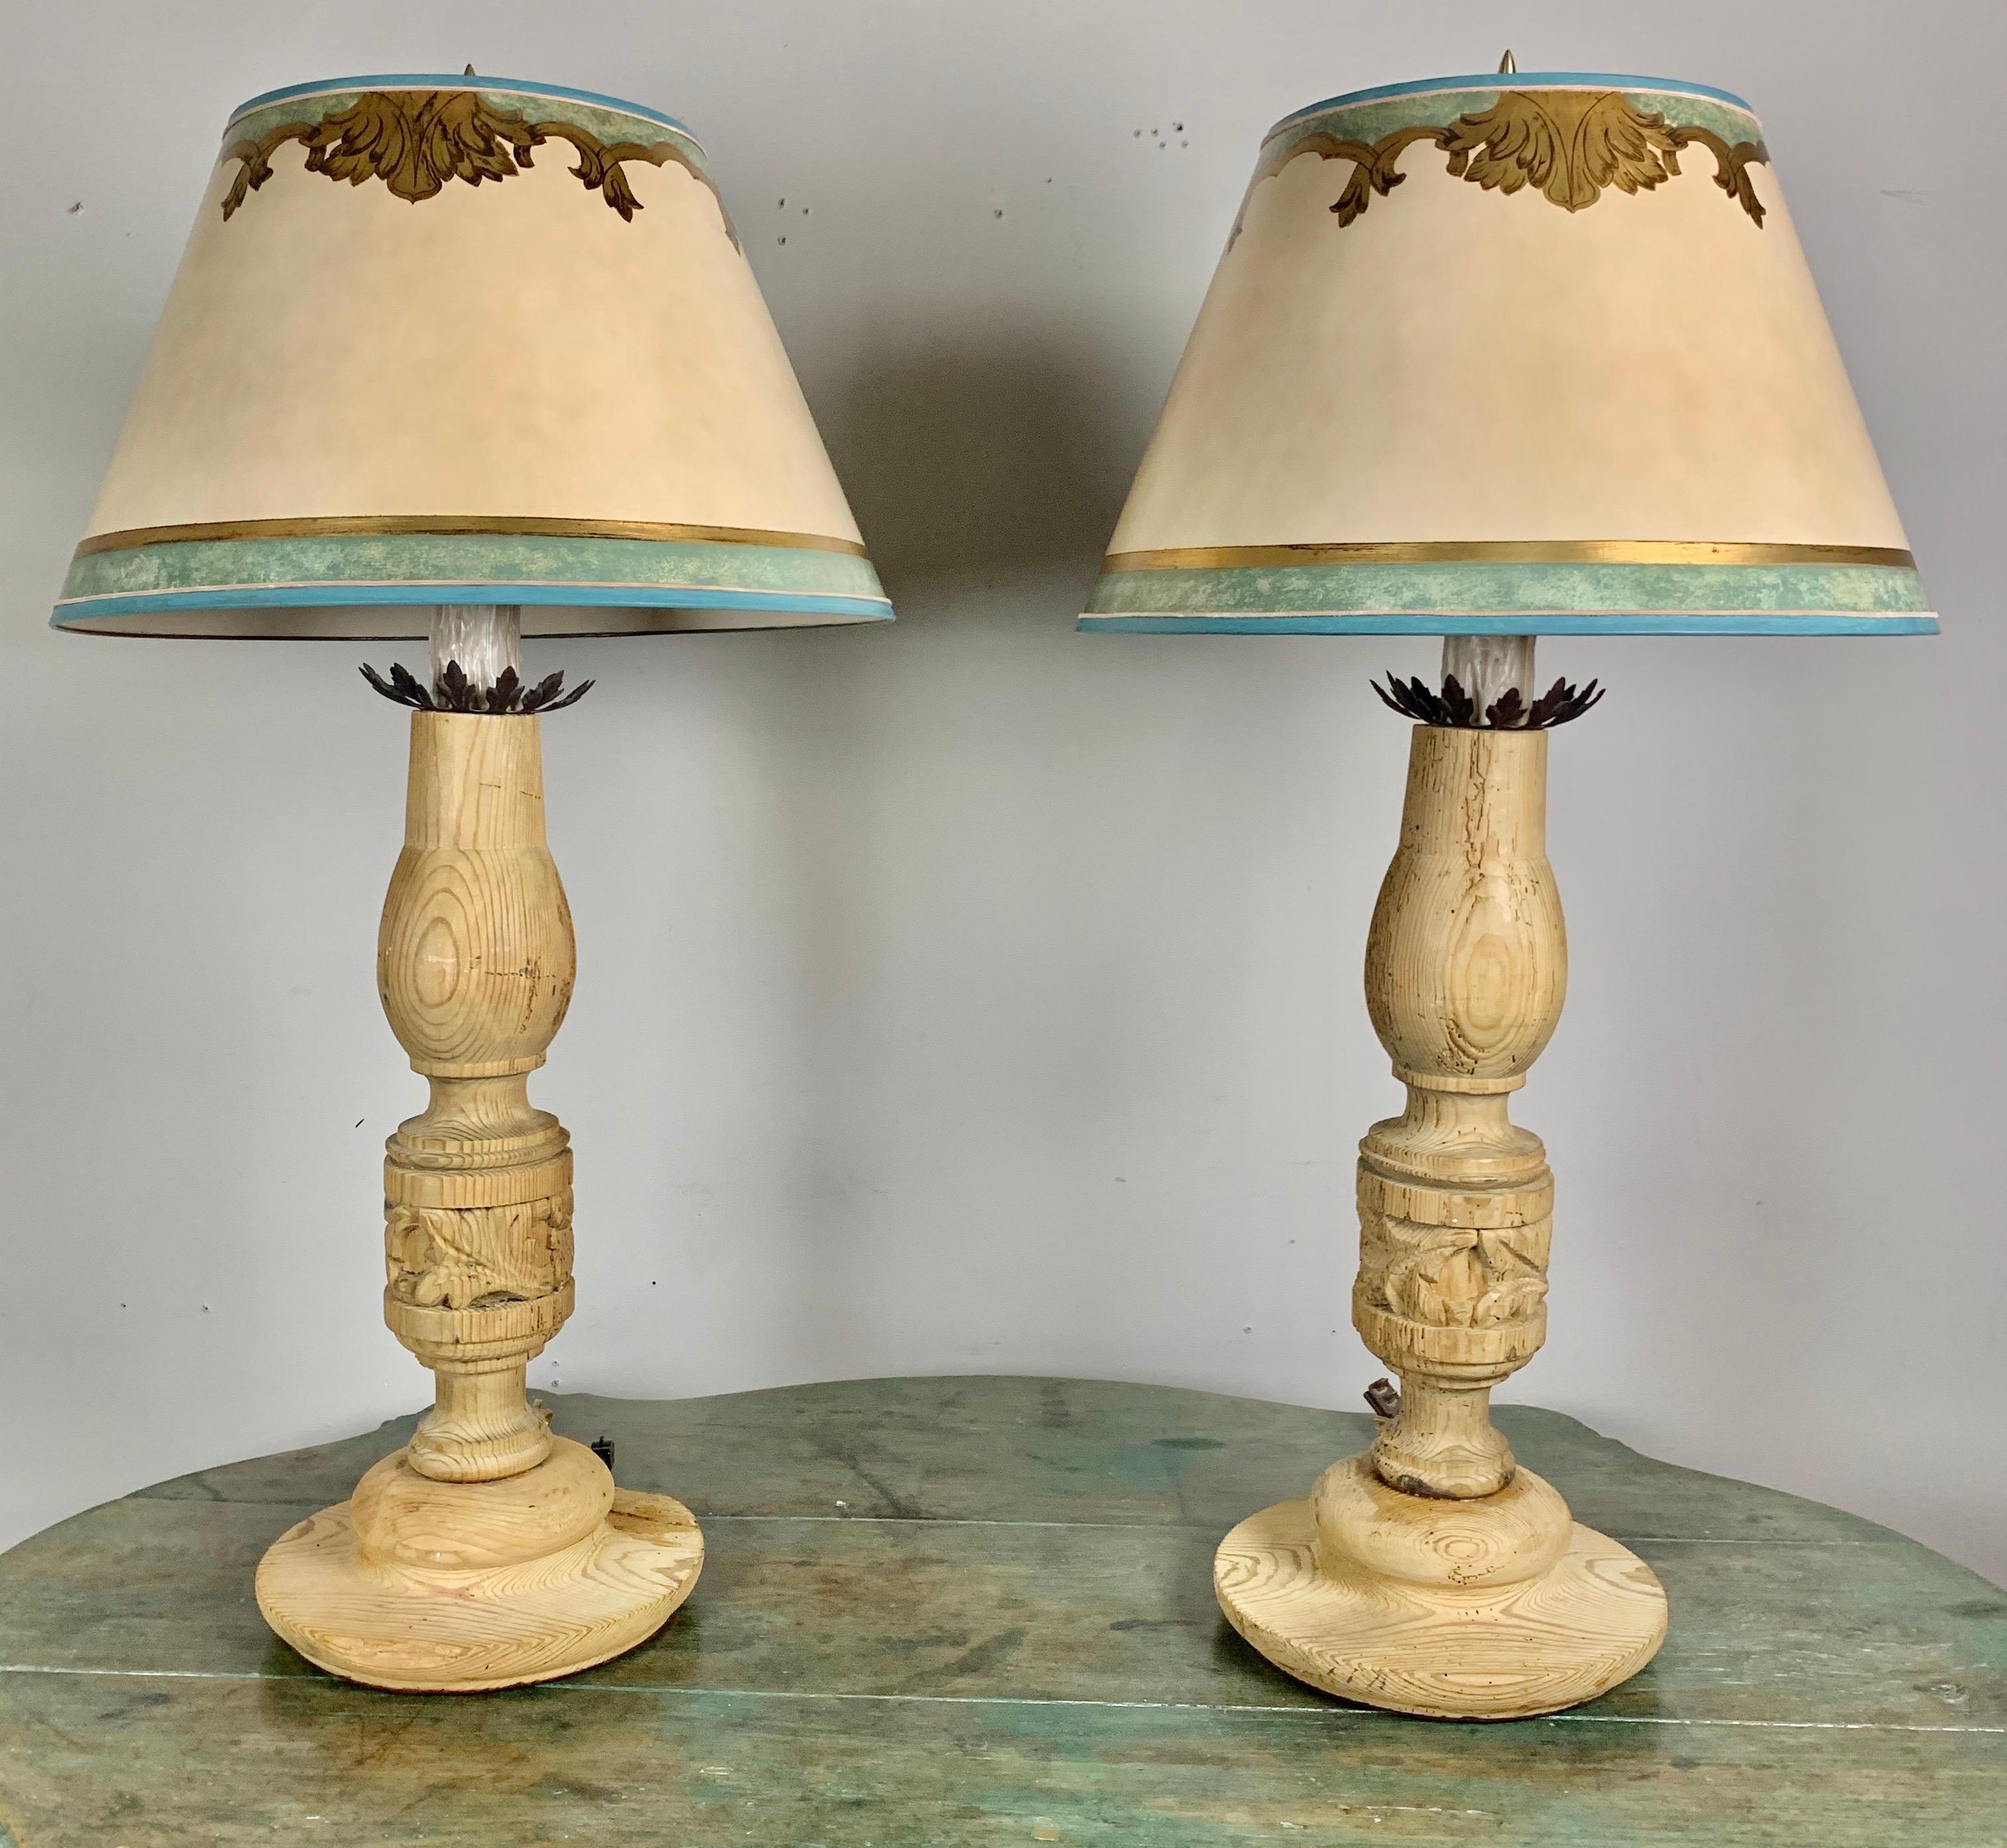 Pair of custom lamps made with a pair of 19th century hand carved Italian candlesticks wired into lamps and crowned with hand painted parchment shades. Newly wired for electricity and ready to install.